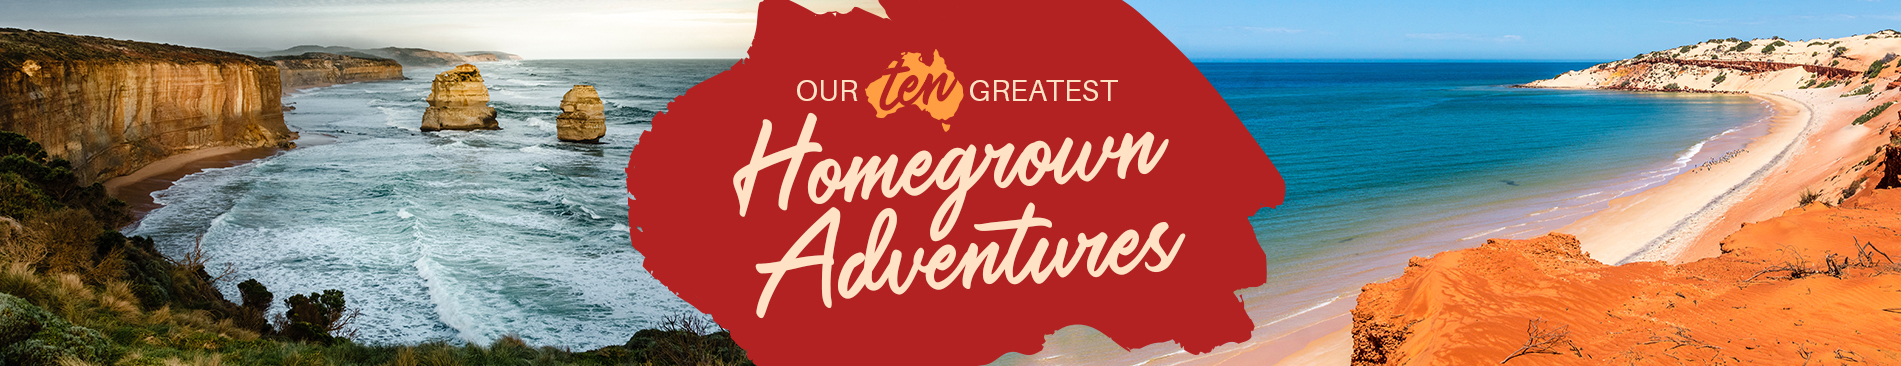 Our 10 Best Homegrown Adventures